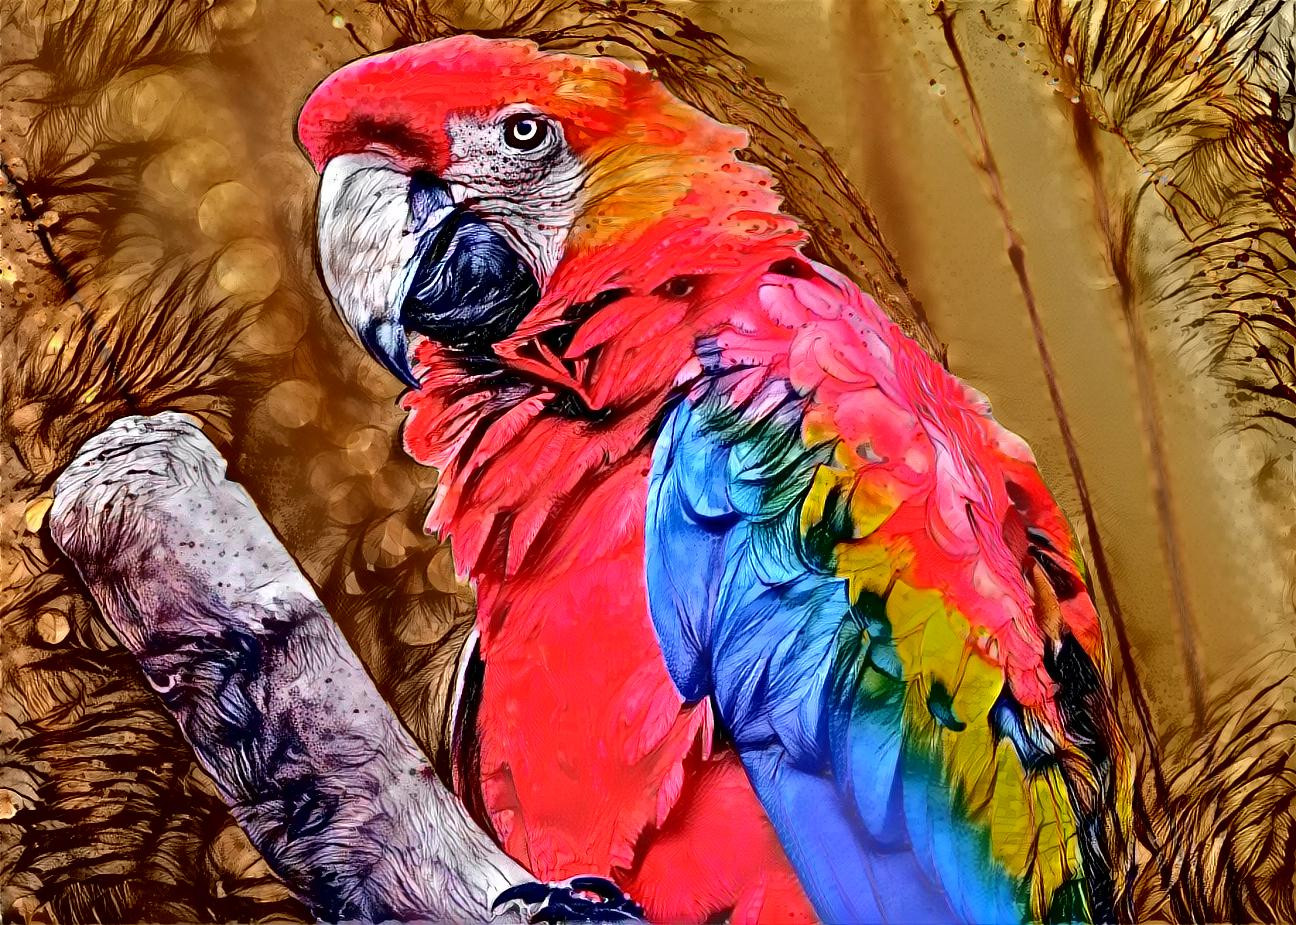 Macaw Parrot [1.2MP]